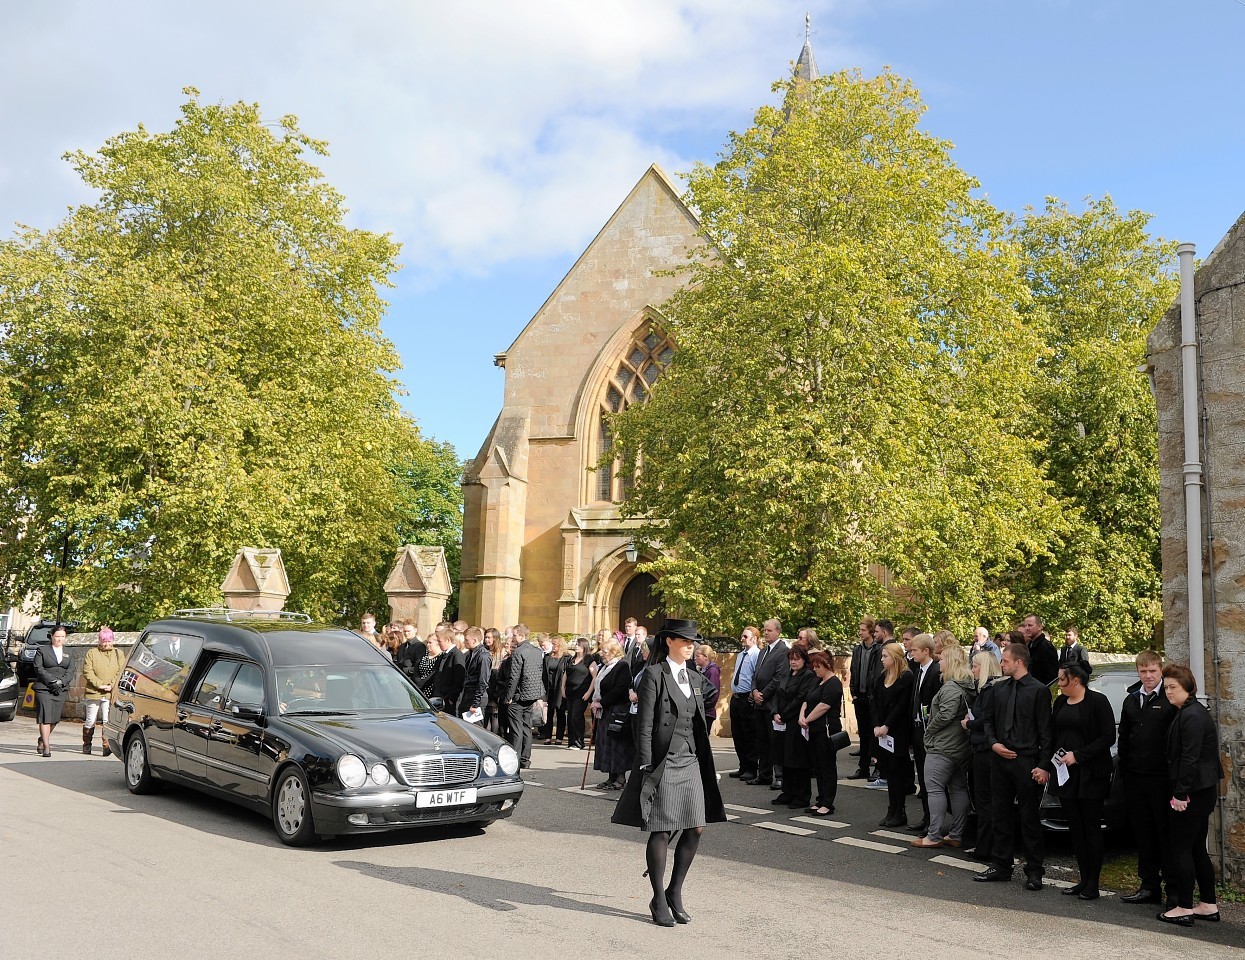 The funeral cortege leaves the Cathedral for Proncynain